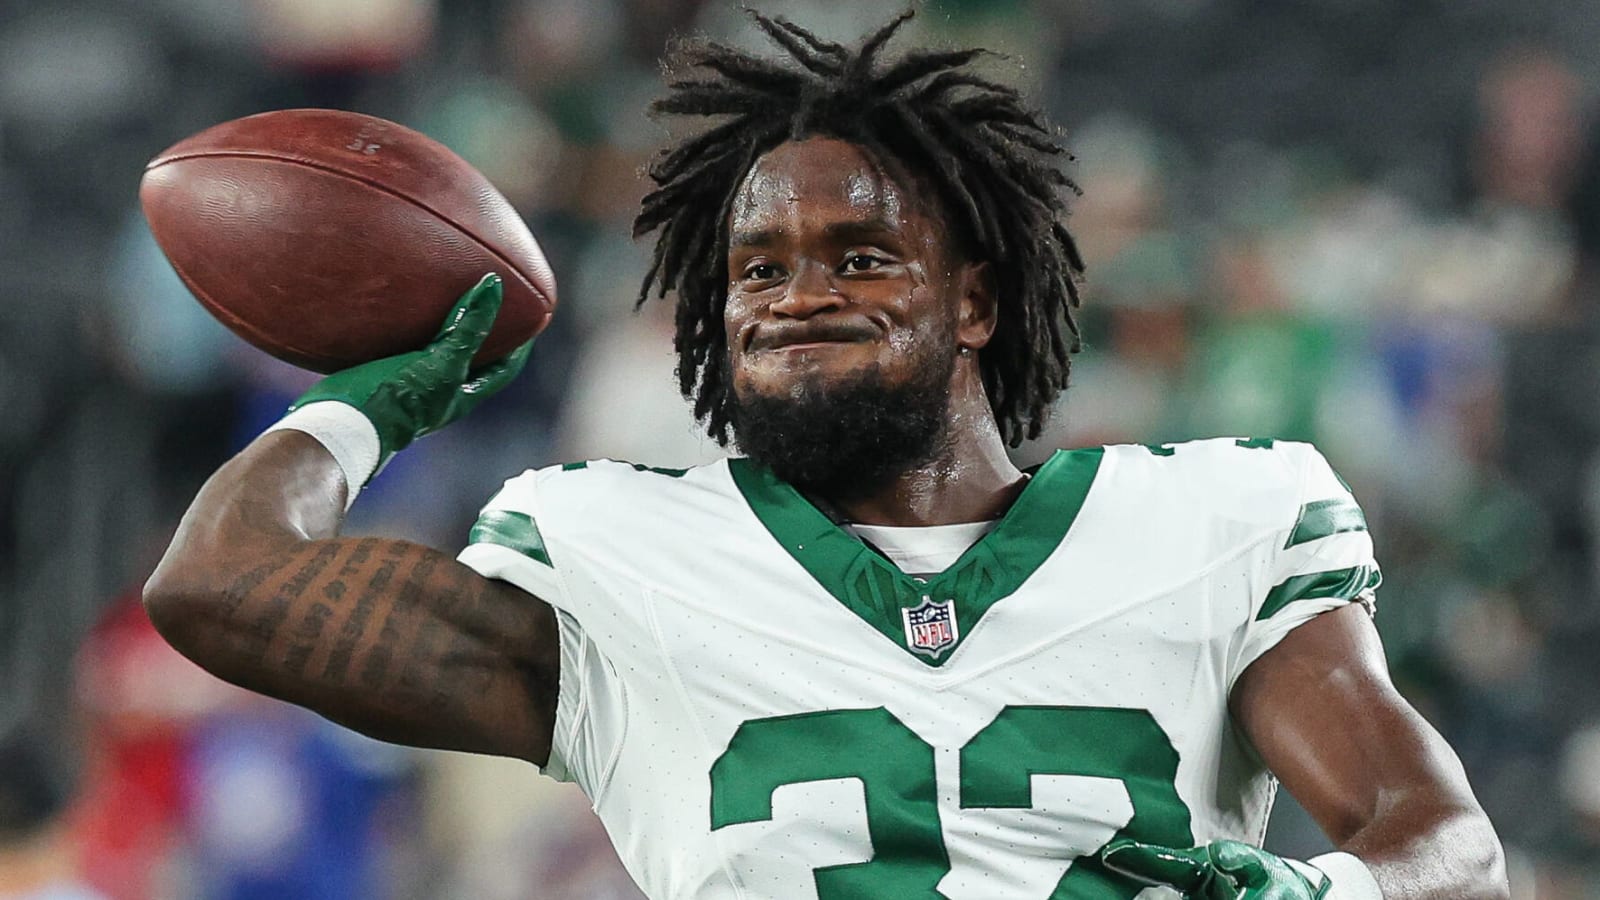 Jets surprisingly release talented RB in stunning move